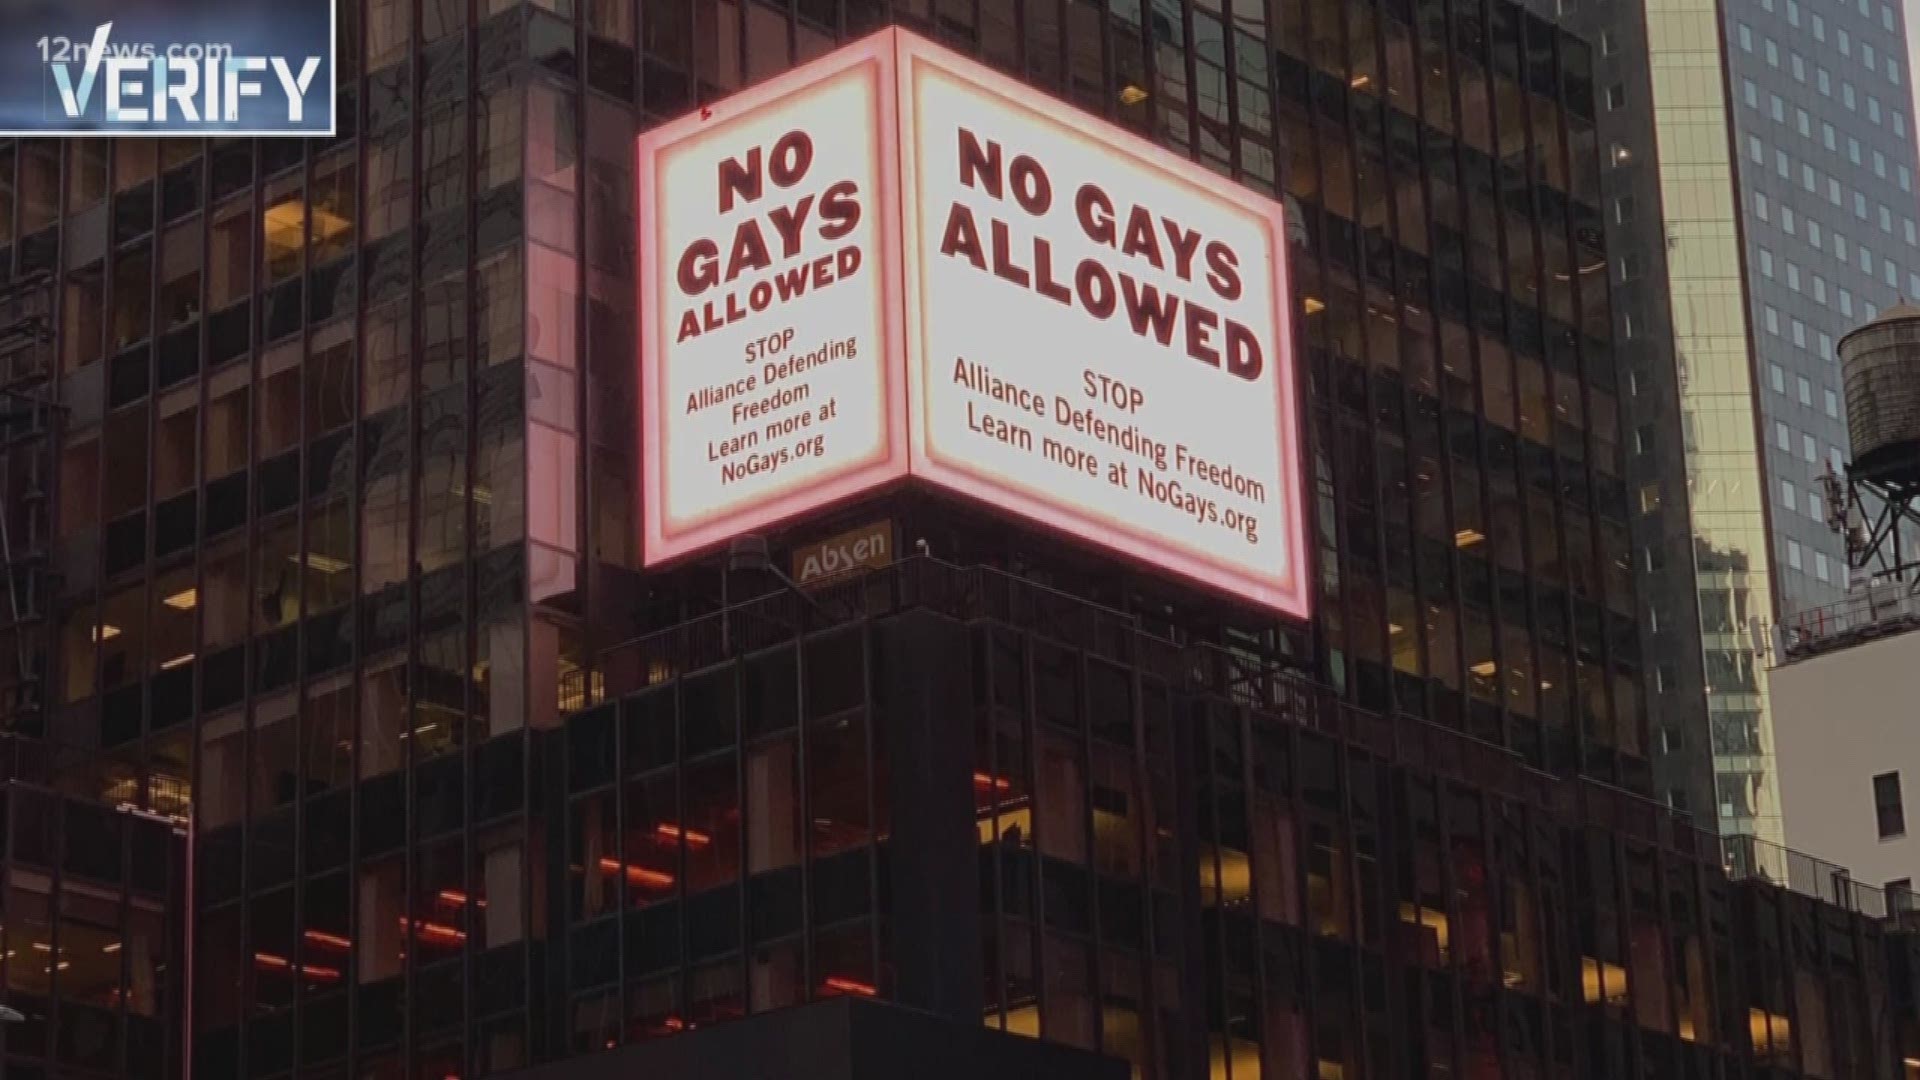 A shocking billboard reading "No Gays Allowed" has gone up in Times Square. The billboard is meant to target a conservative, Christian non-profit, Alliance Defending Freedom, based in Scottsdale.